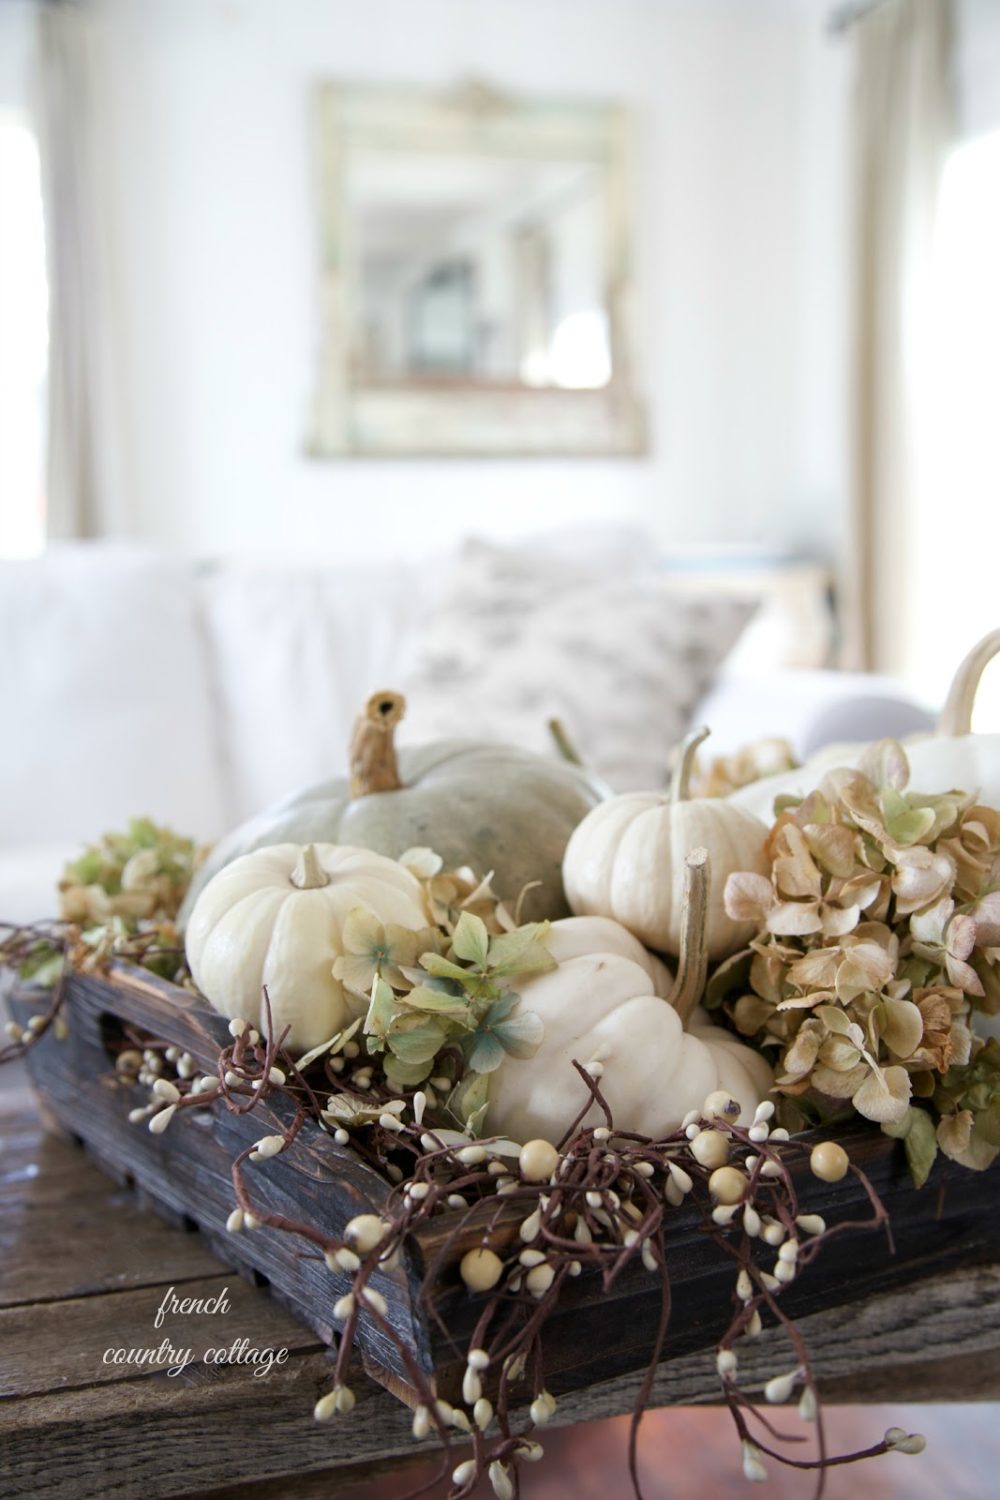 50 amazing DIY projects to try this fall - www.bydreamsfactory.com